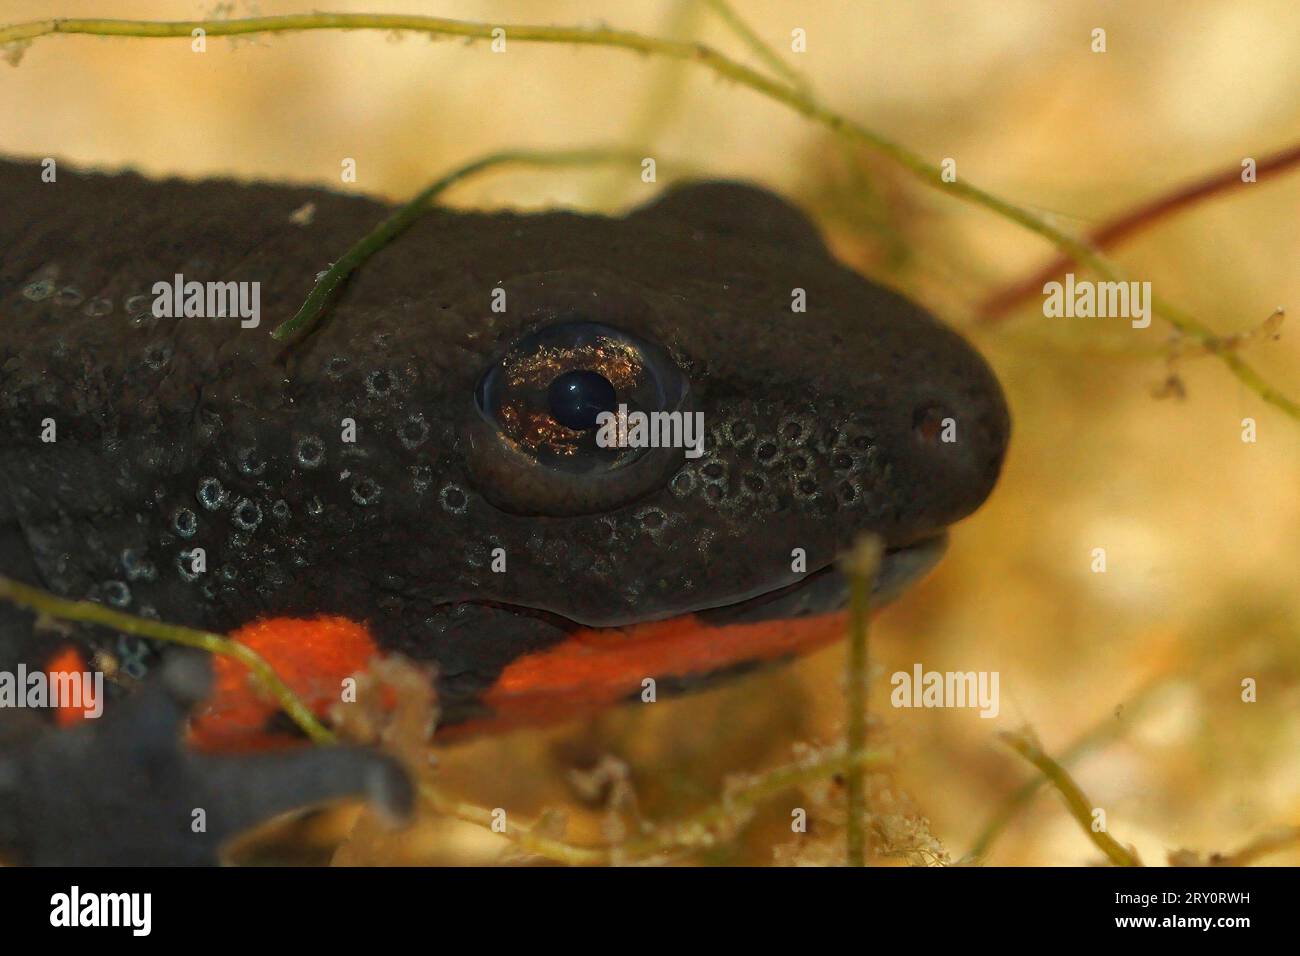 Detailed closeup on the had of an aquatic Chinese fire-bellied newt, Cynops orientalis Stock Photo